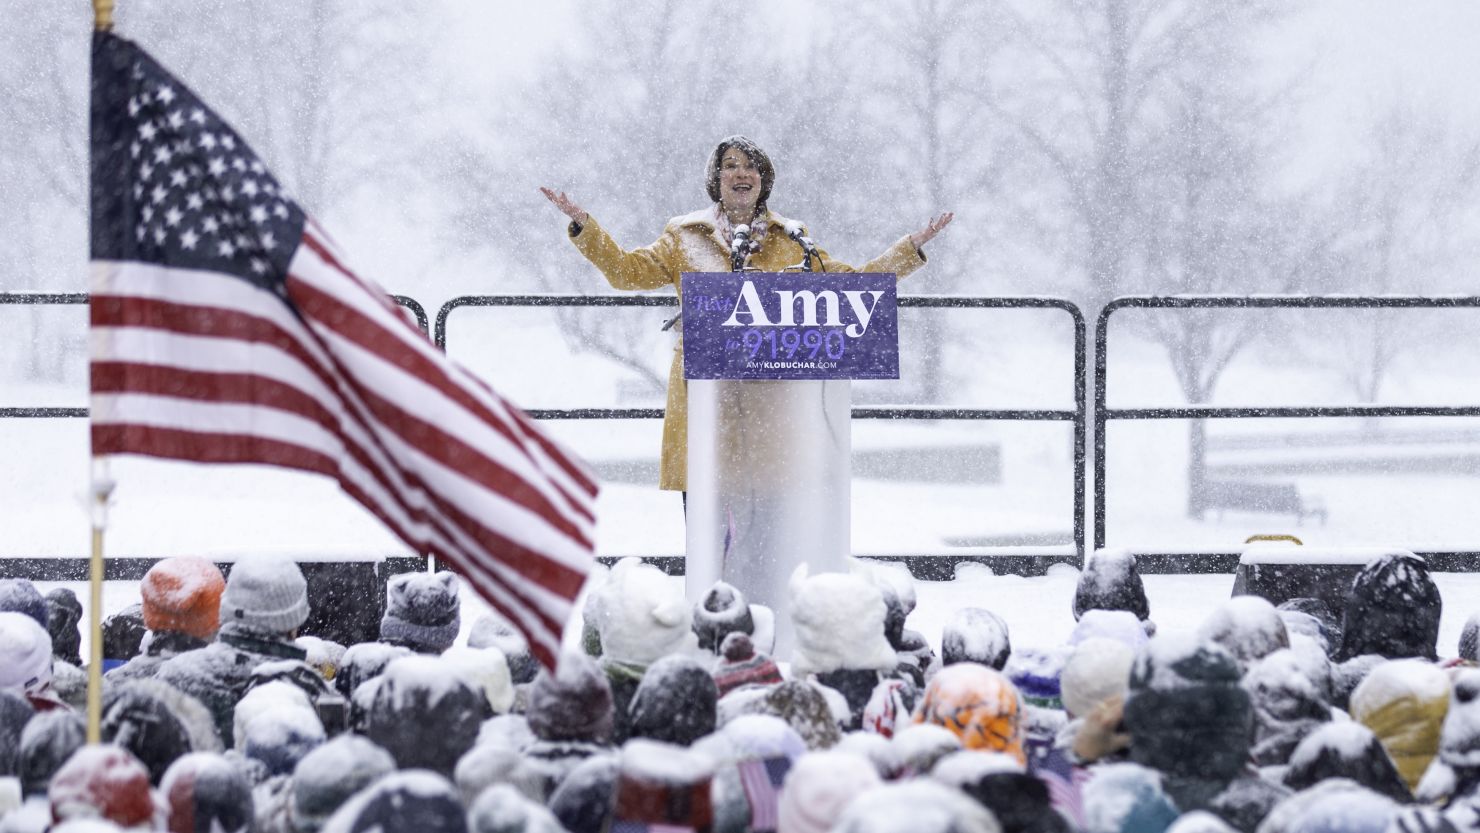 US Senator Amy Klobuchar (D-MN) announces her candidacy for president during a snow fall on February 10, 2019 in Minneapolis, Minnesota. - Klobuchar joined the ever-growing field of contenders hoping to unseat President Donald Trump in the 2020 White House race. (Photo by Kerem Yucel / AFP)        (Photo credit should read KEREM YUCEL/AFP/Getty Images)